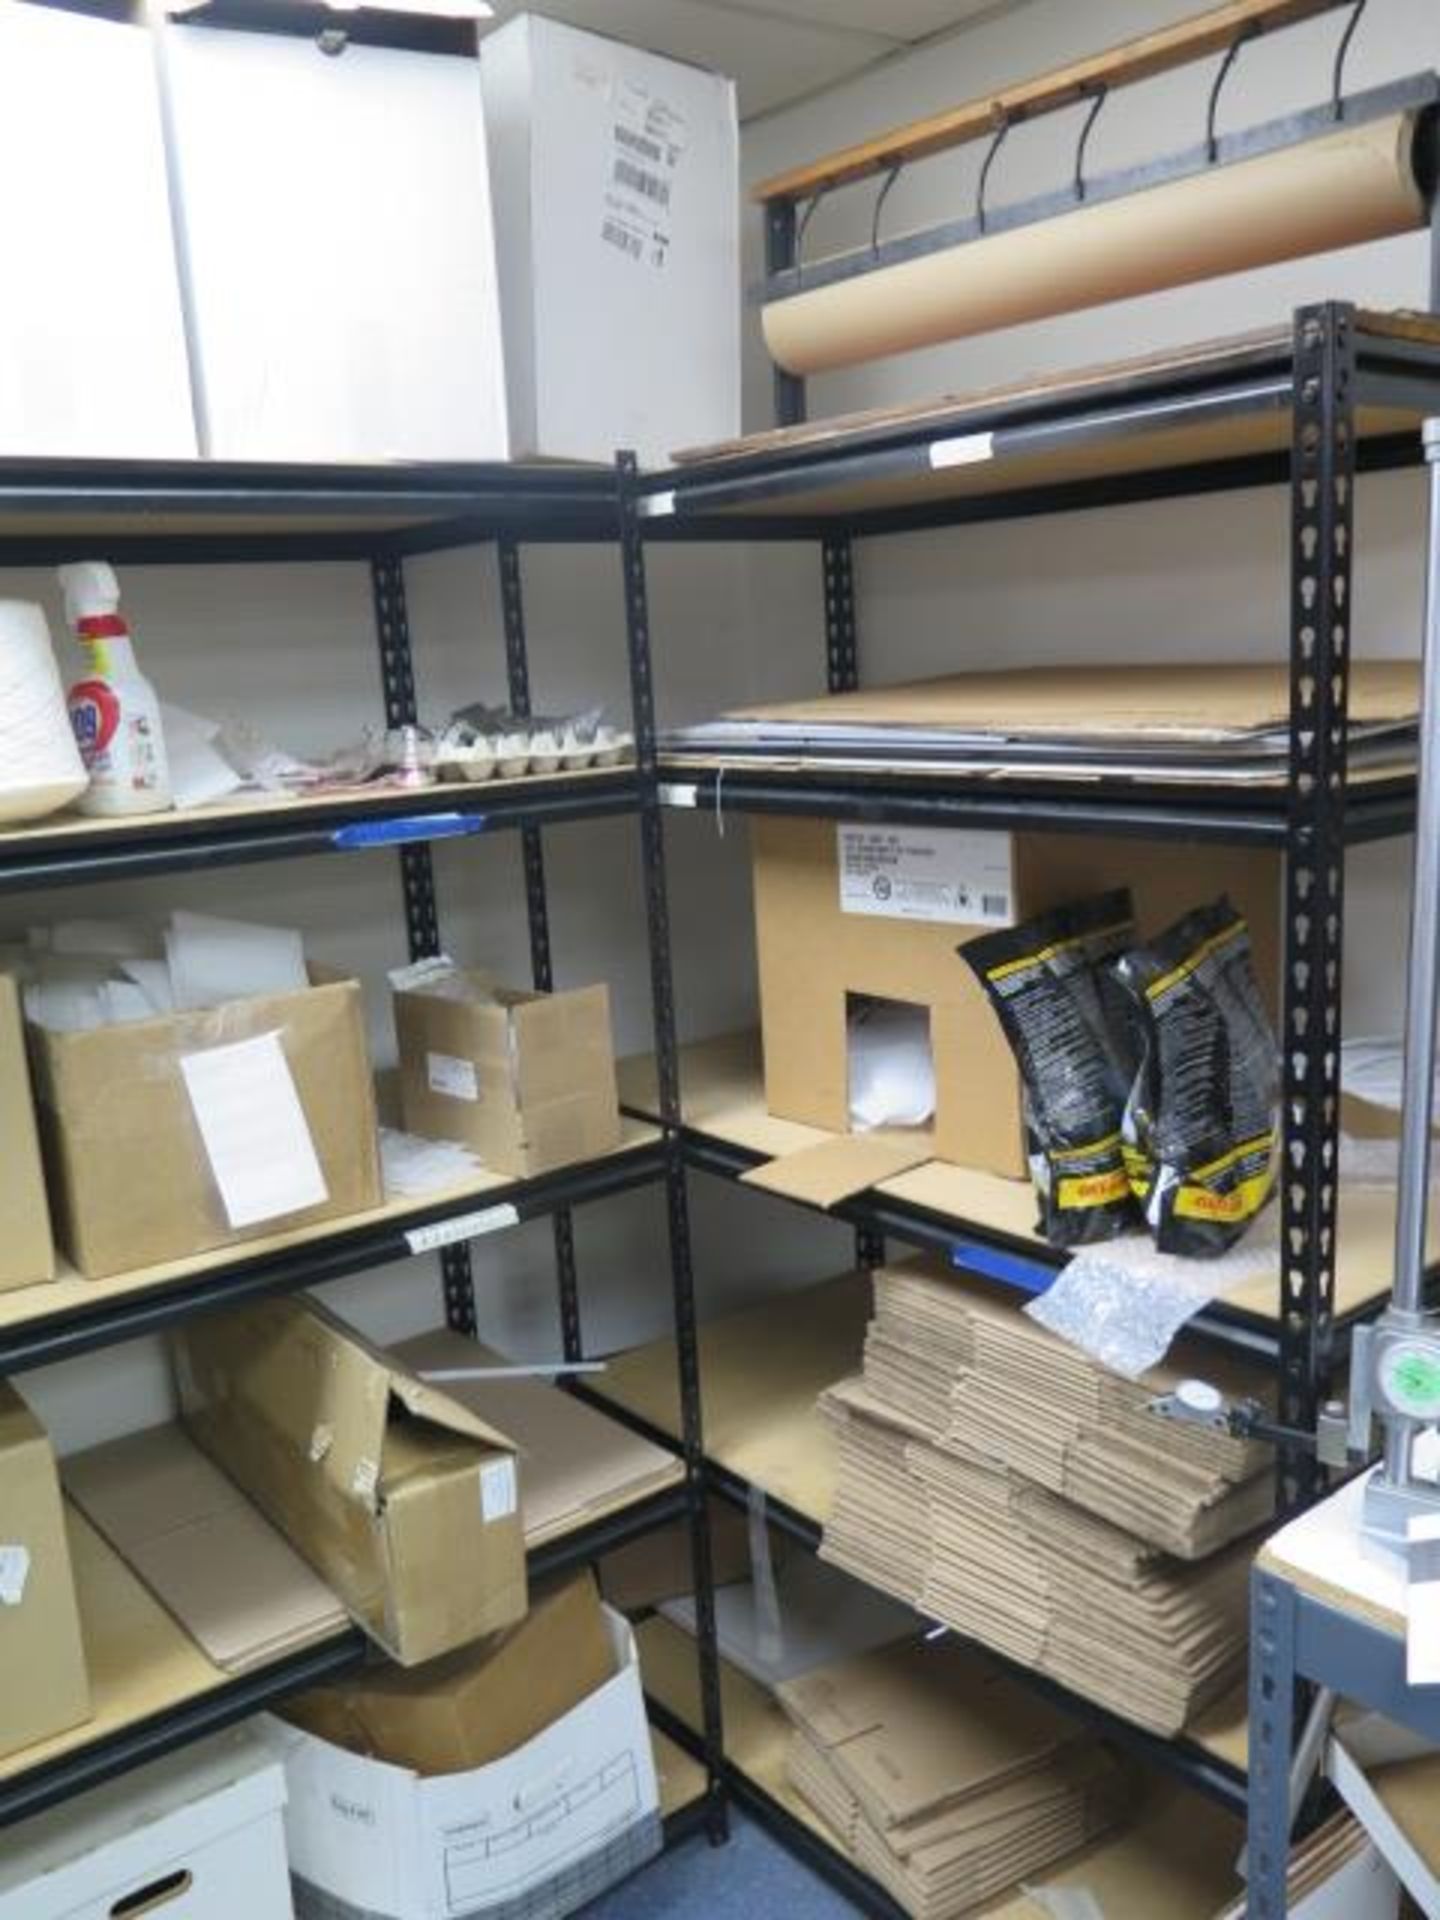 Shipping Boxes, Supplies and Shelves (SOLD AS-IS - NO WARRANTY) - Image 2 of 6